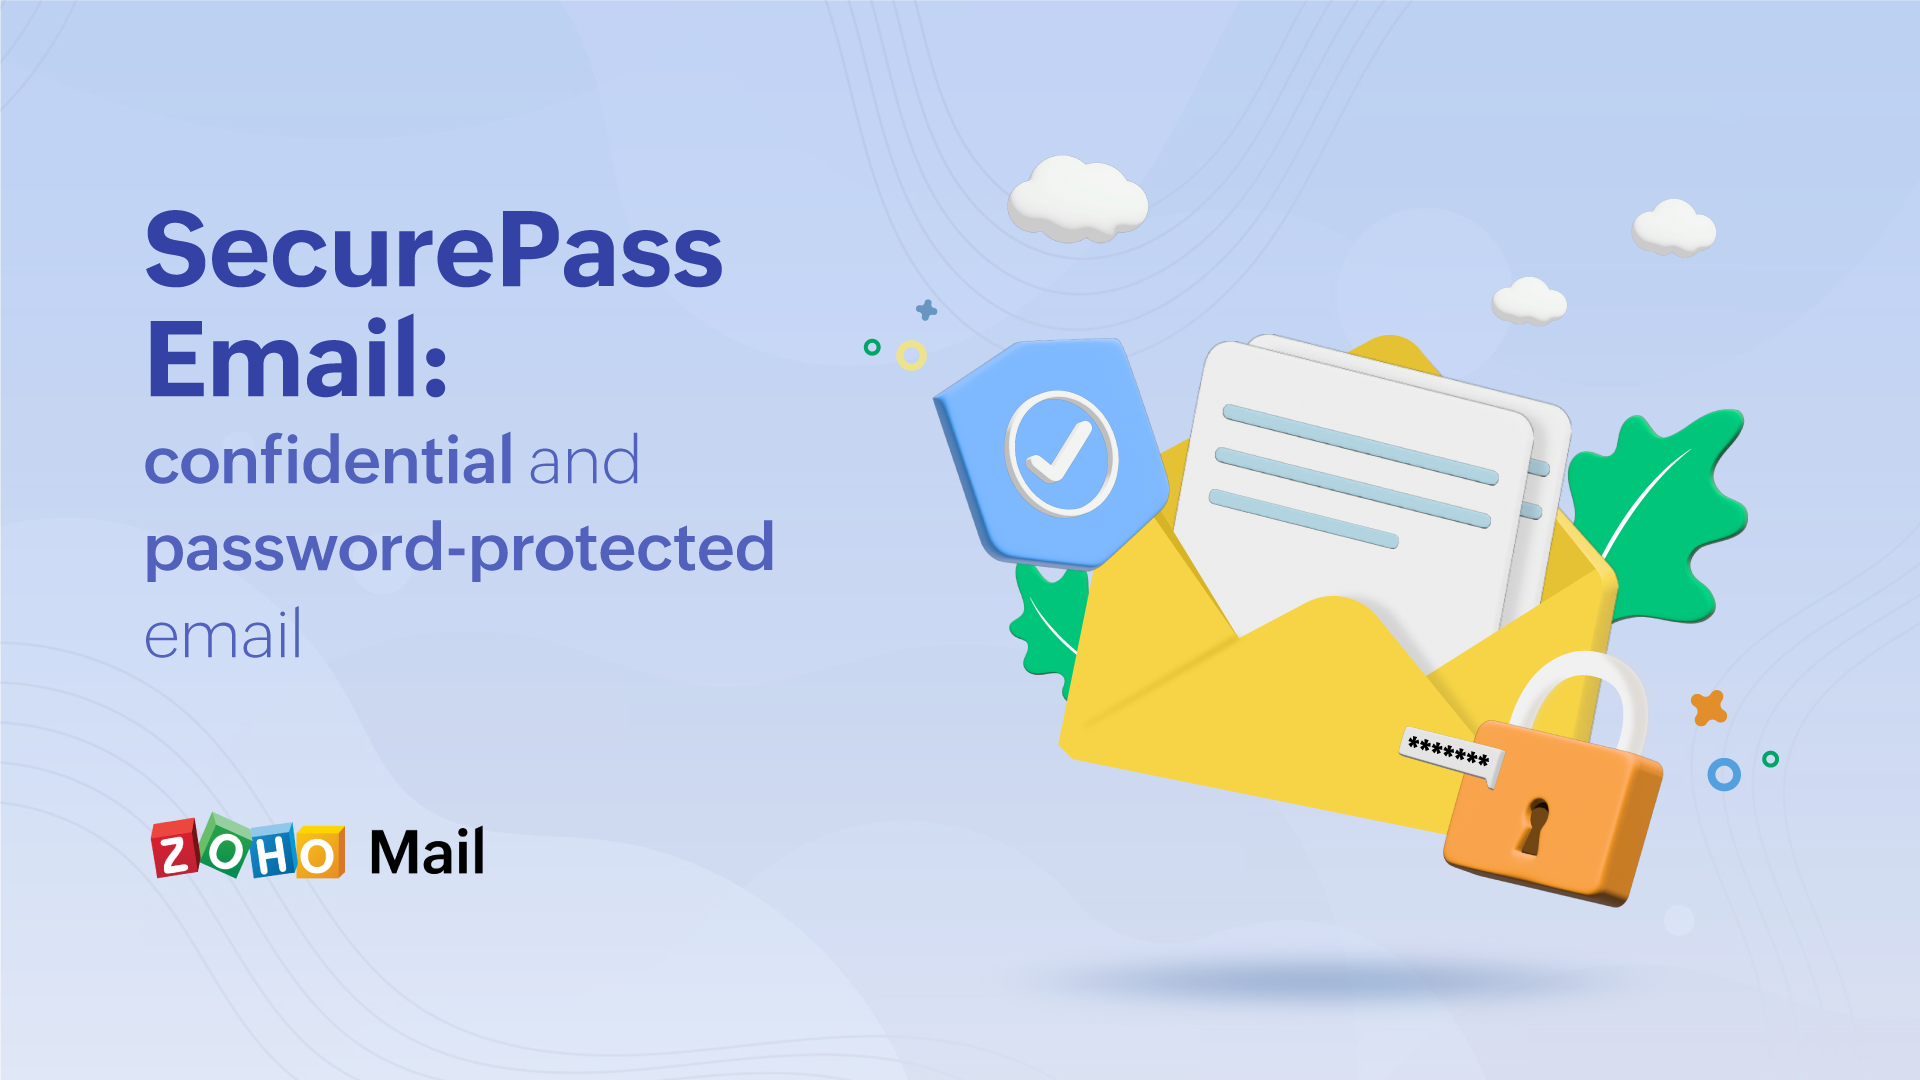 SecurePass Email: confidential and password-protected email